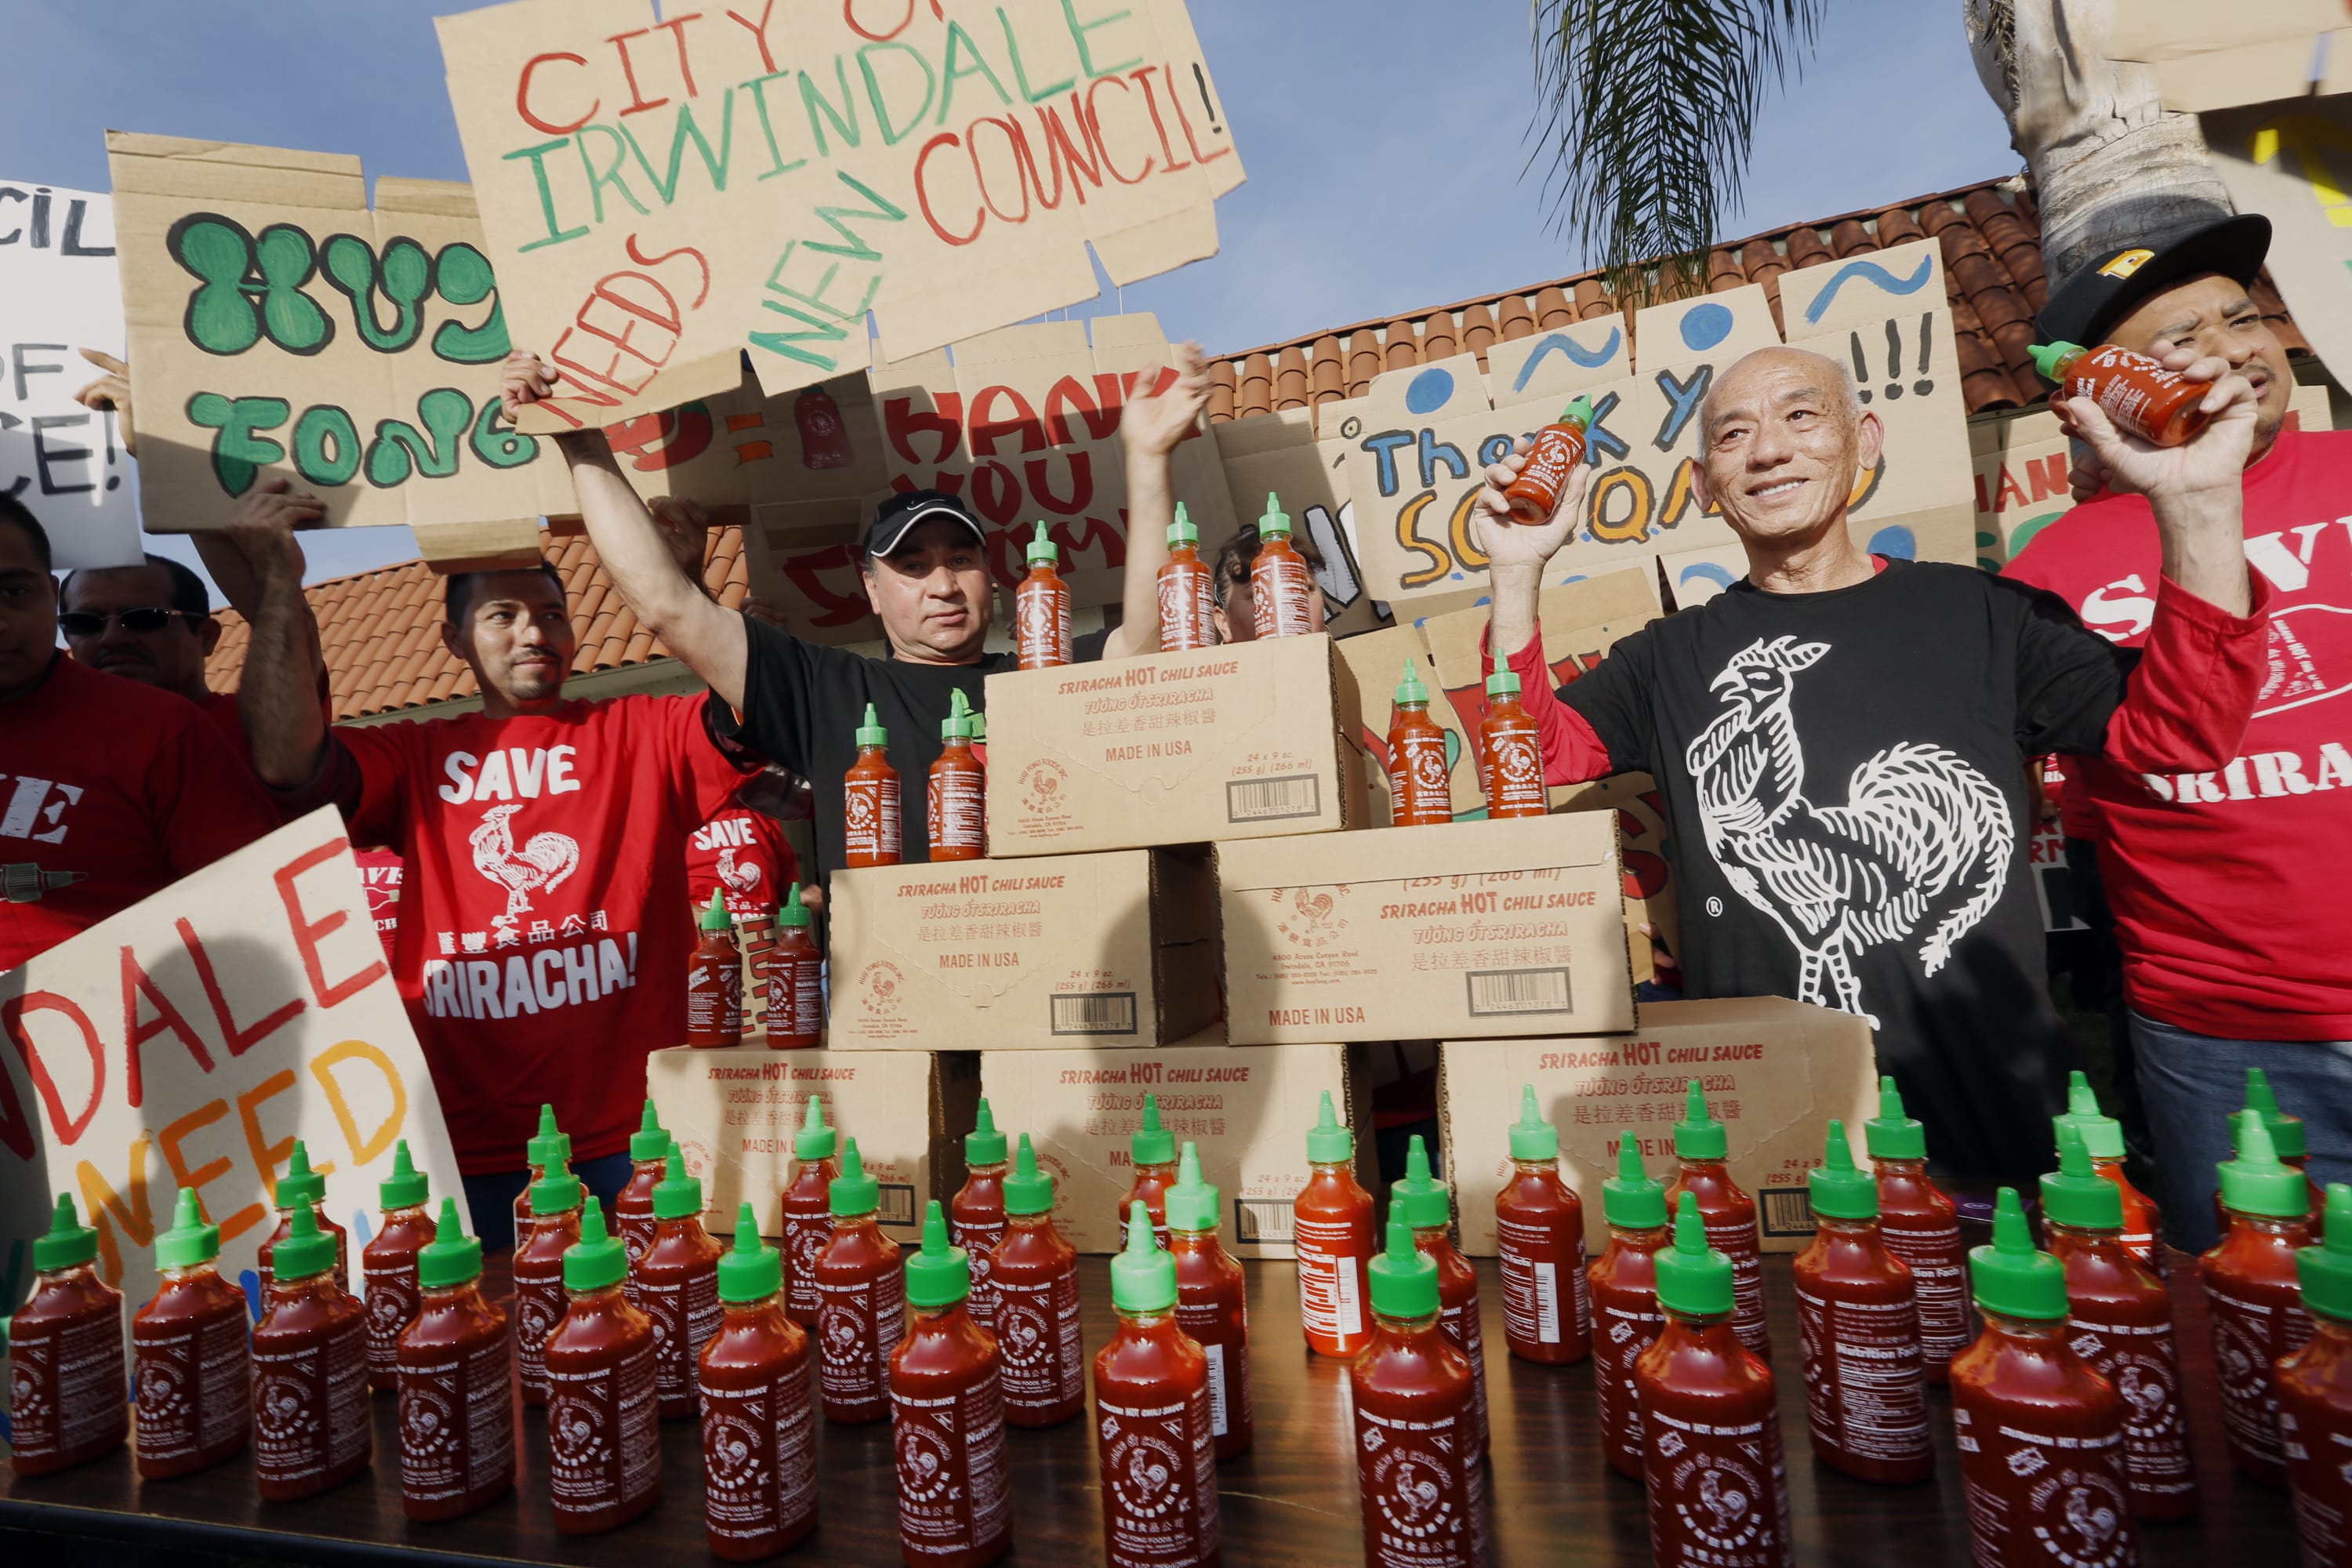 Sriracha hot sauce founder David Tran, second from right, with his workers and supporters protest ahead of the city council meeting in Irwindale, Calif., on April 23.